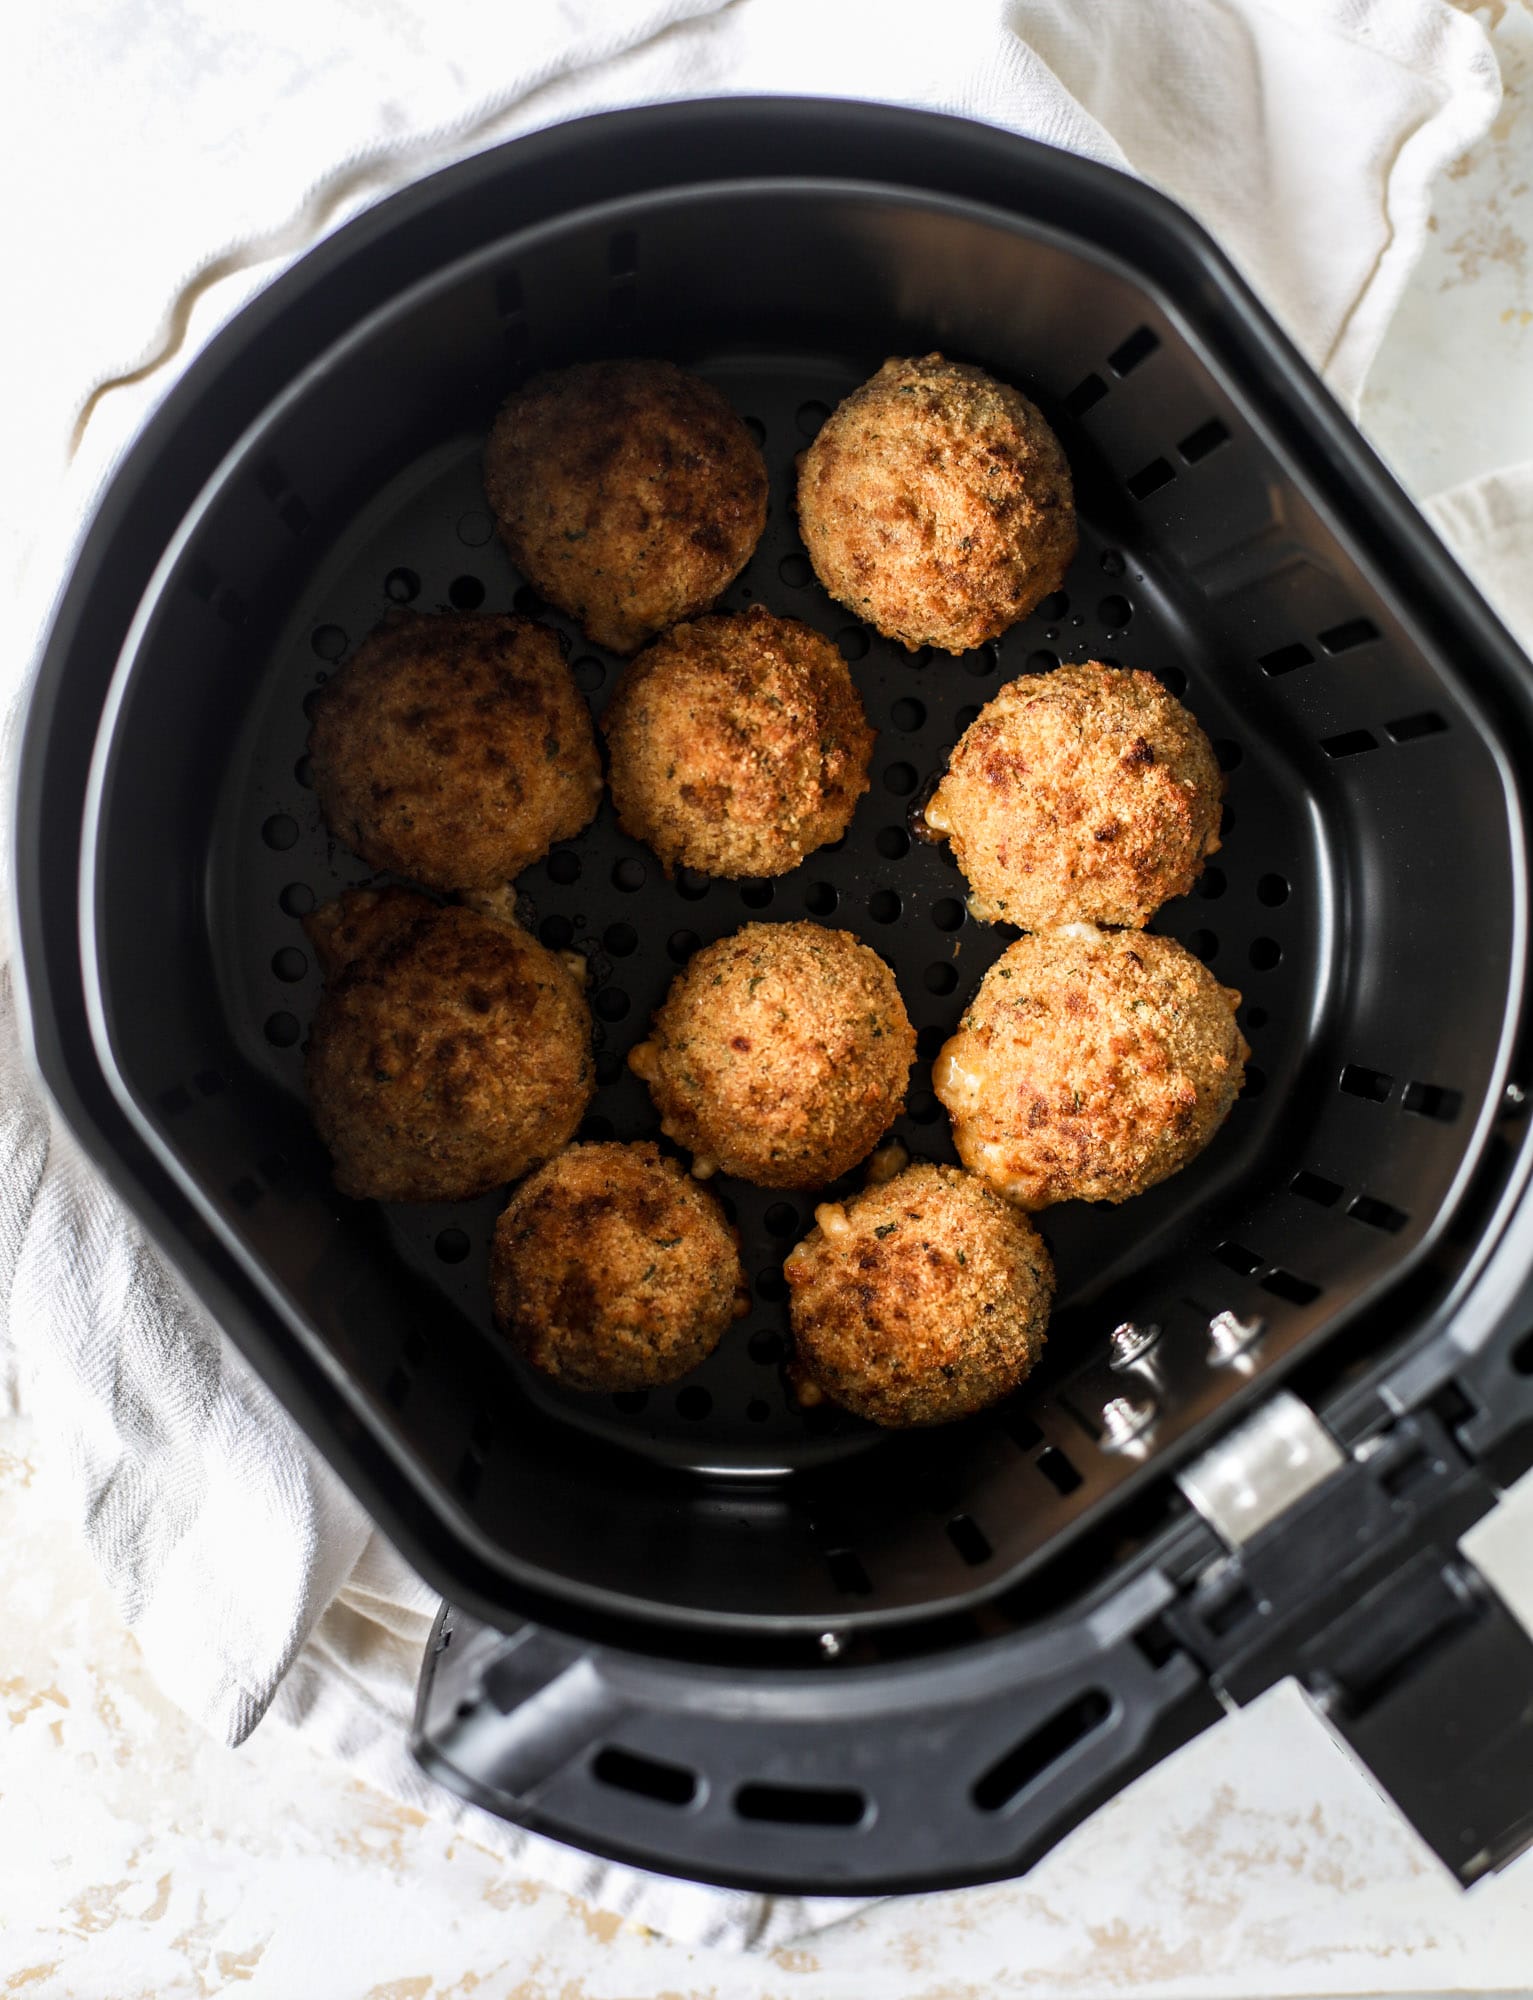 This cheesy cauliflower rice arancini is every bit as delicious as traditional arancini, and so much lighter! Cheesy on the side, crunchy on the outside.